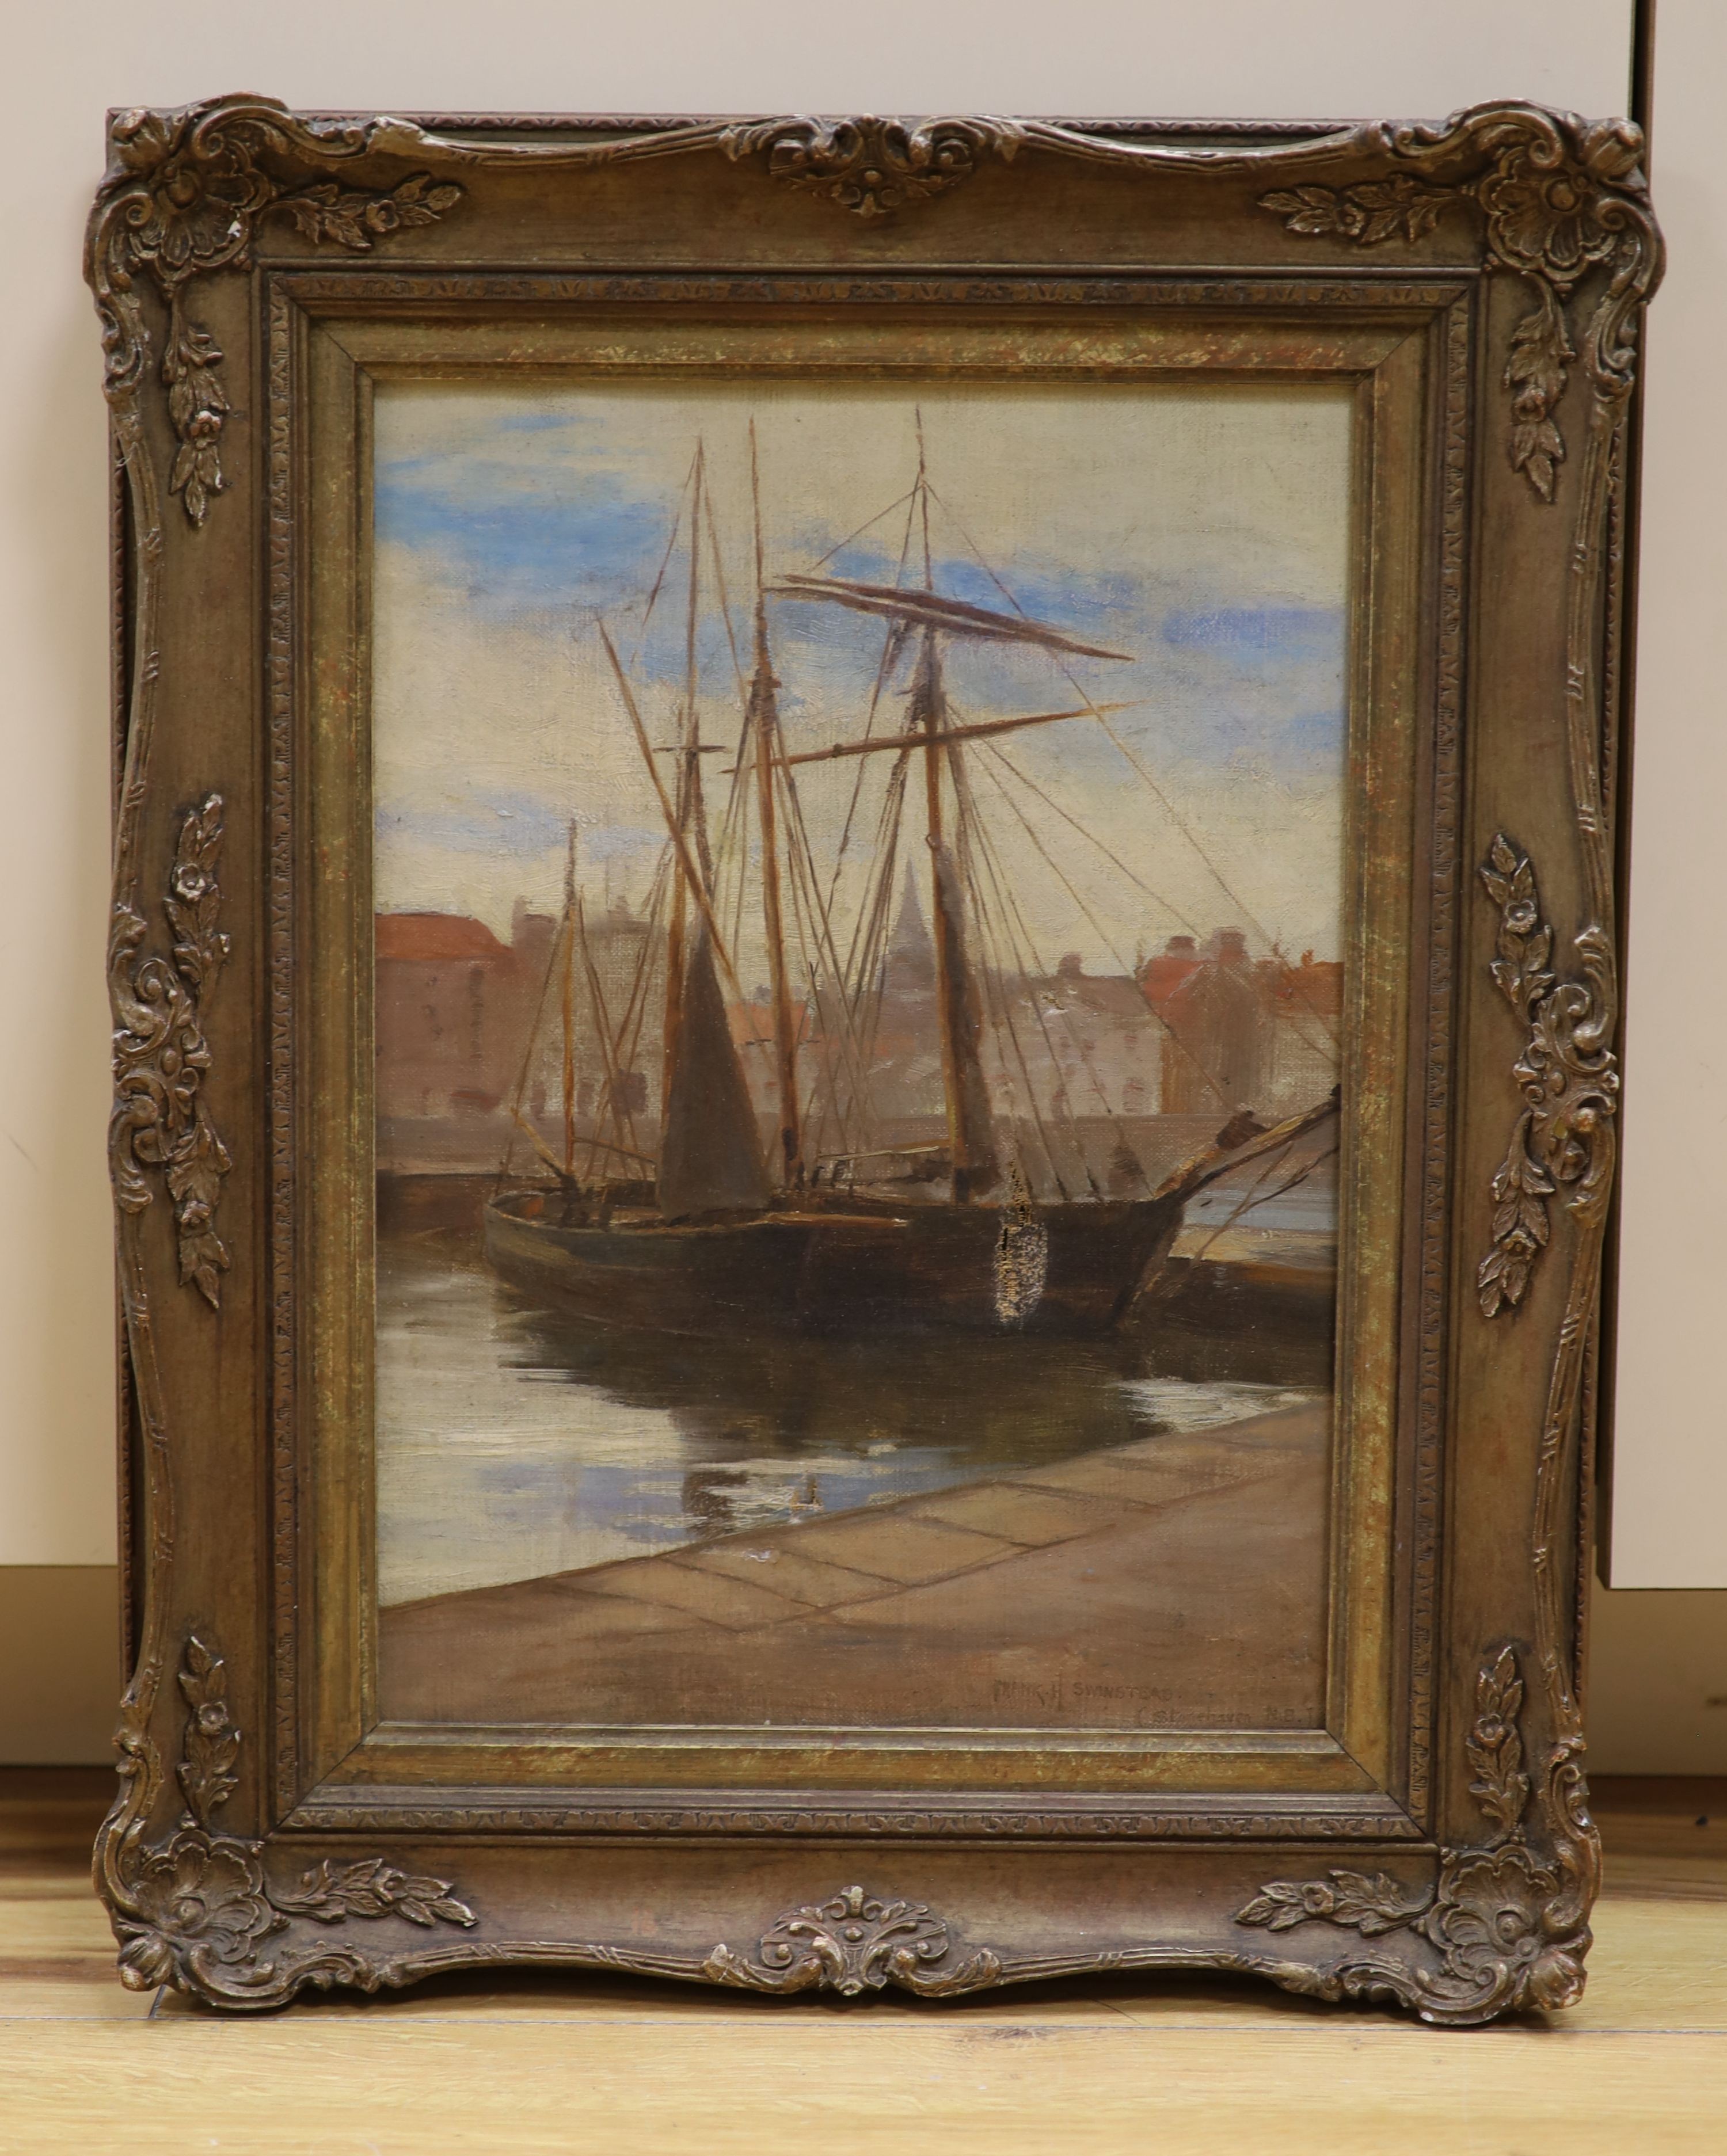 Frank H. Swinstead, oil on canvas, Stonehaven harbour, signed and inscribed 'Stonehaven NB', 36 x 26cm